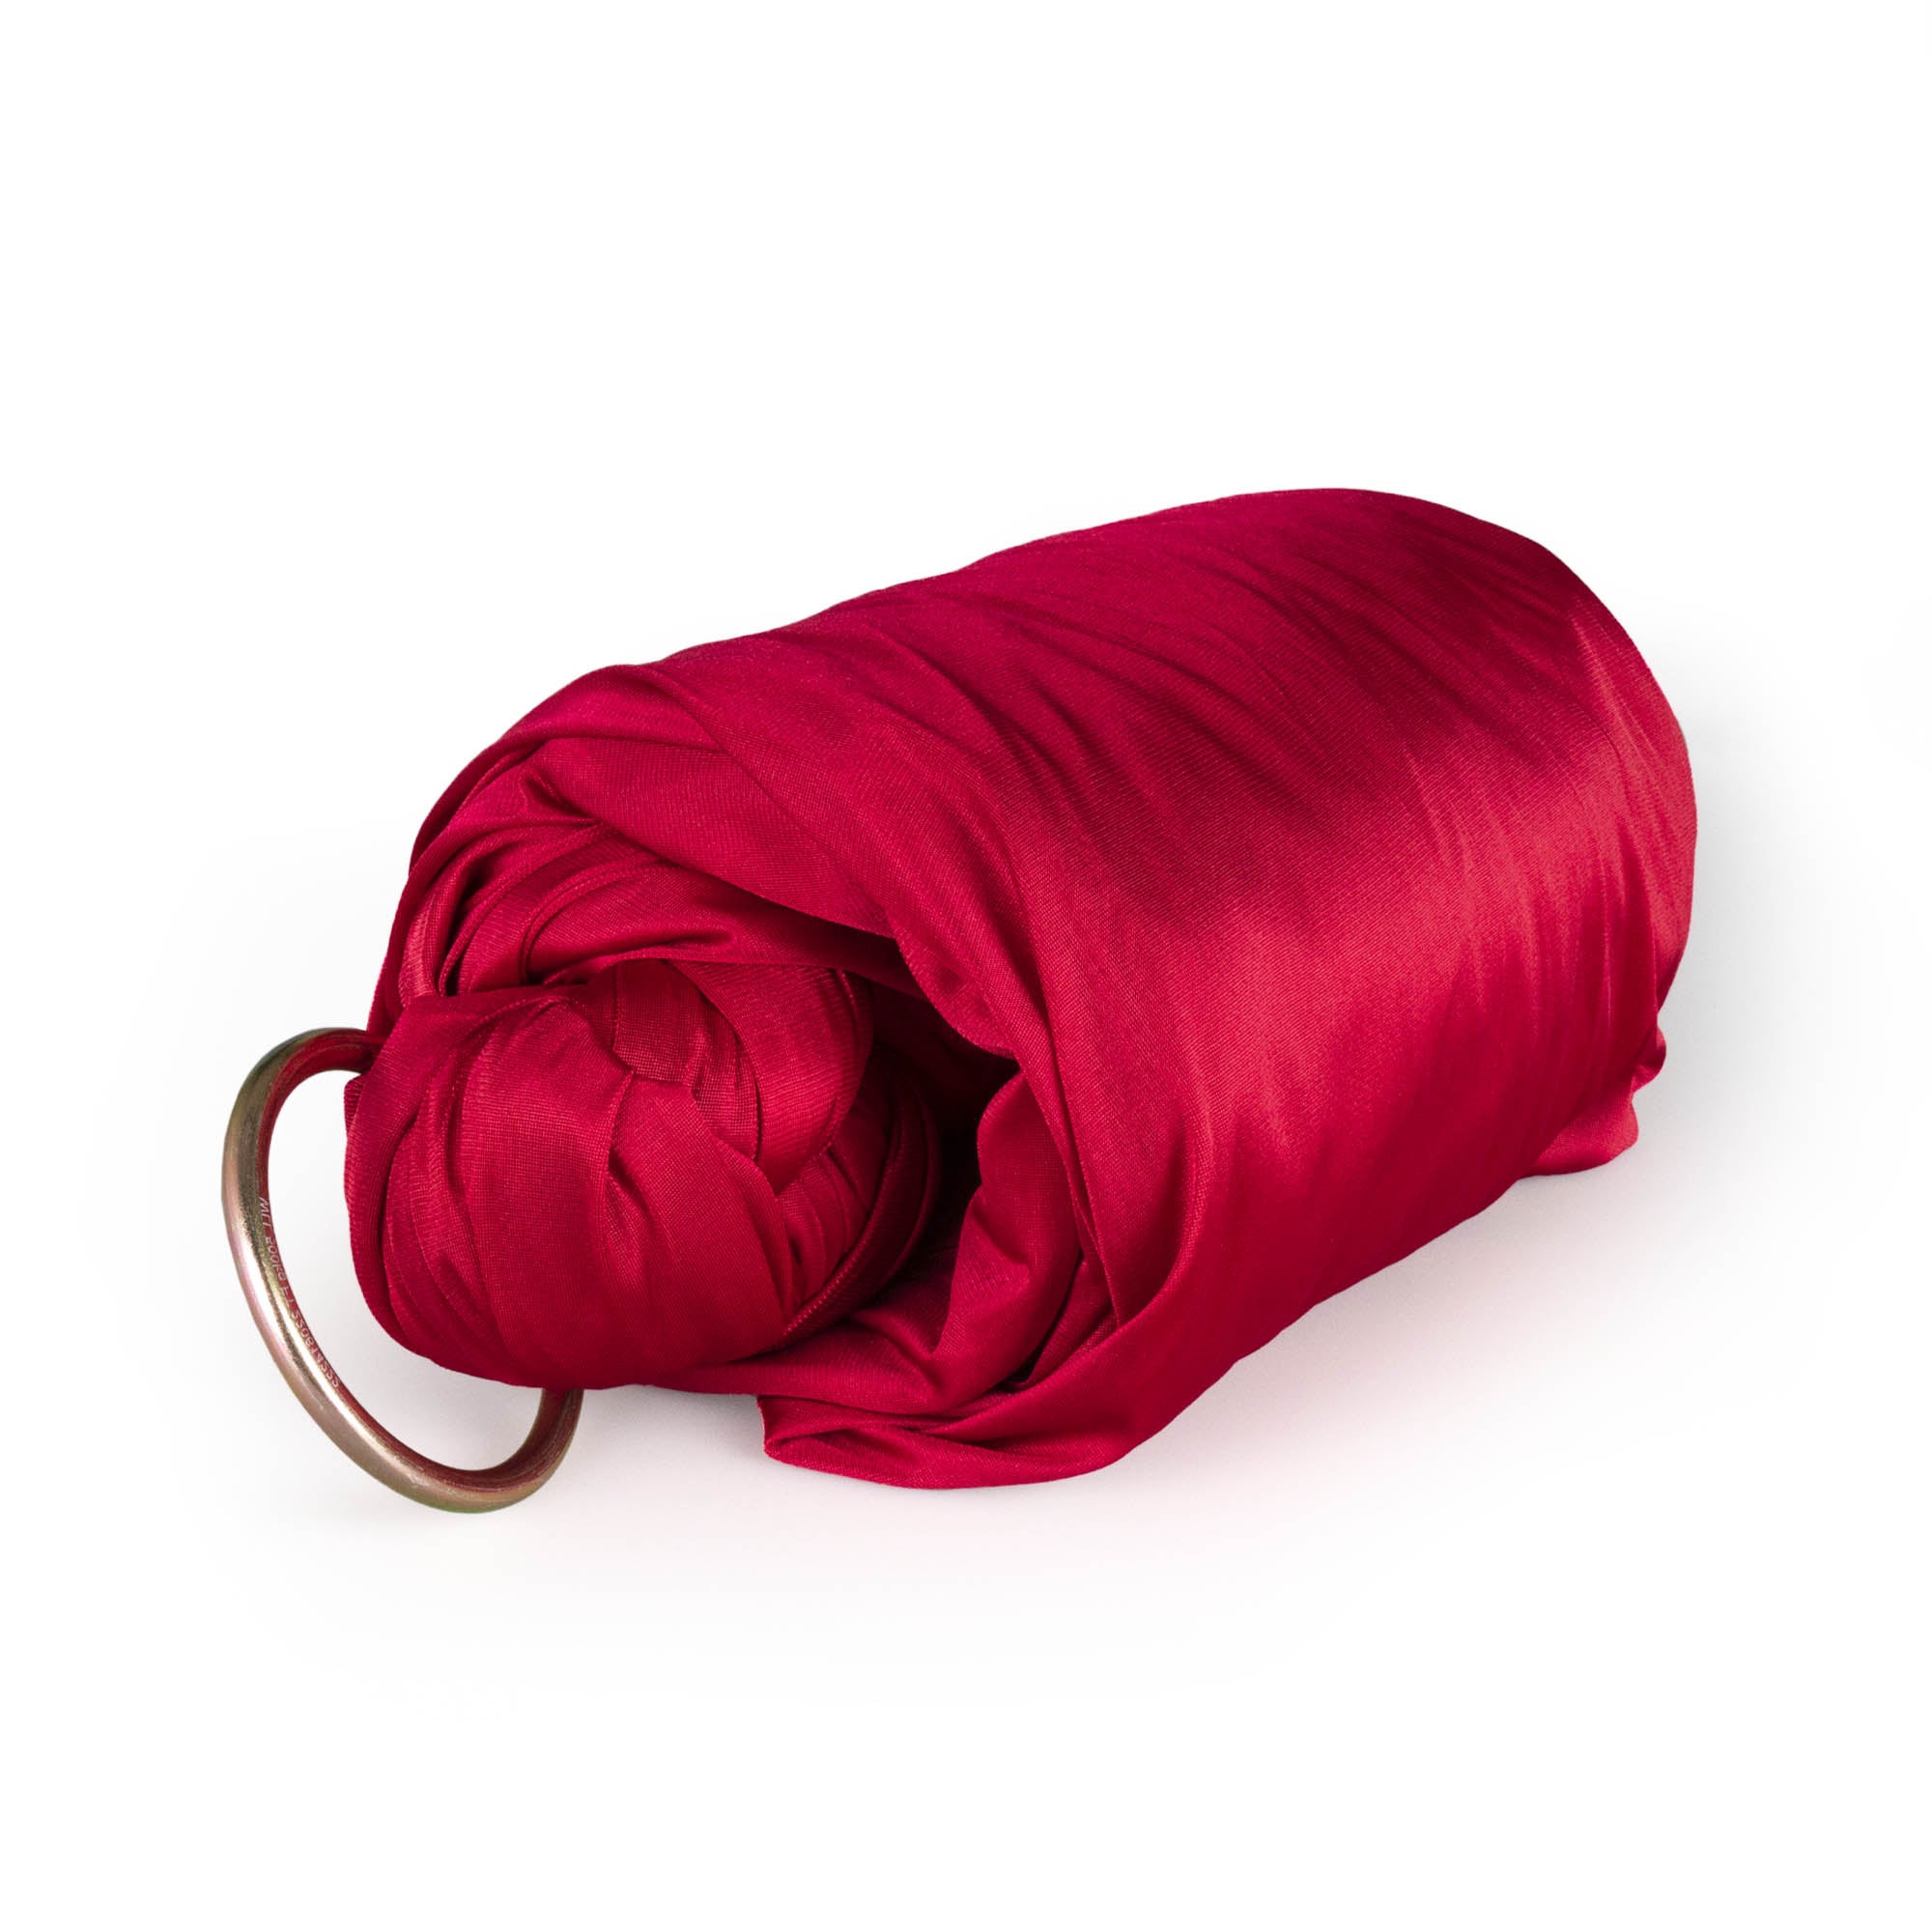 Maroon yoga hammock with O rings attached